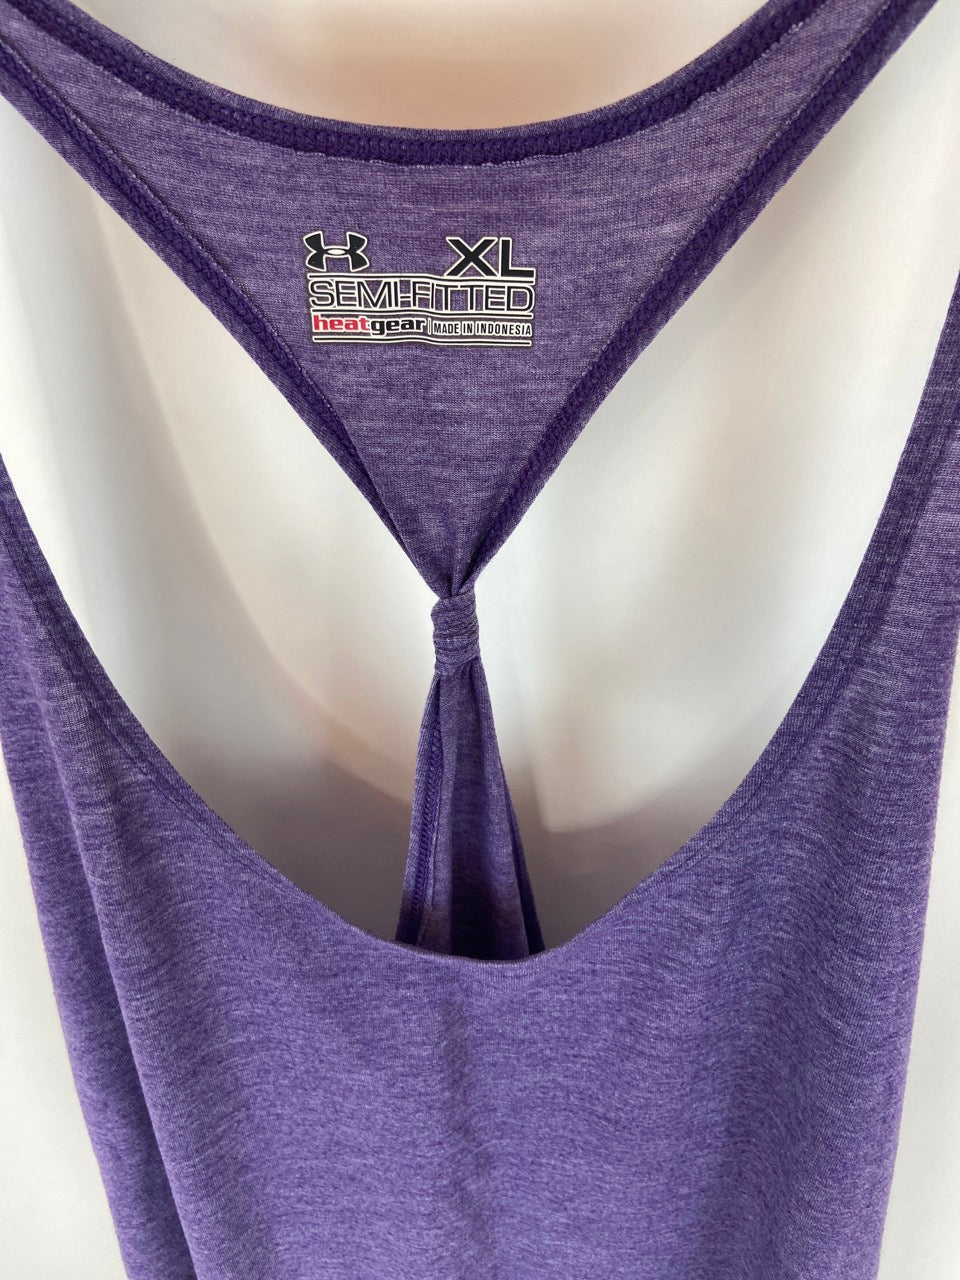 Under Armour Semi-Fitted Knotted Razor Back Tank- XL